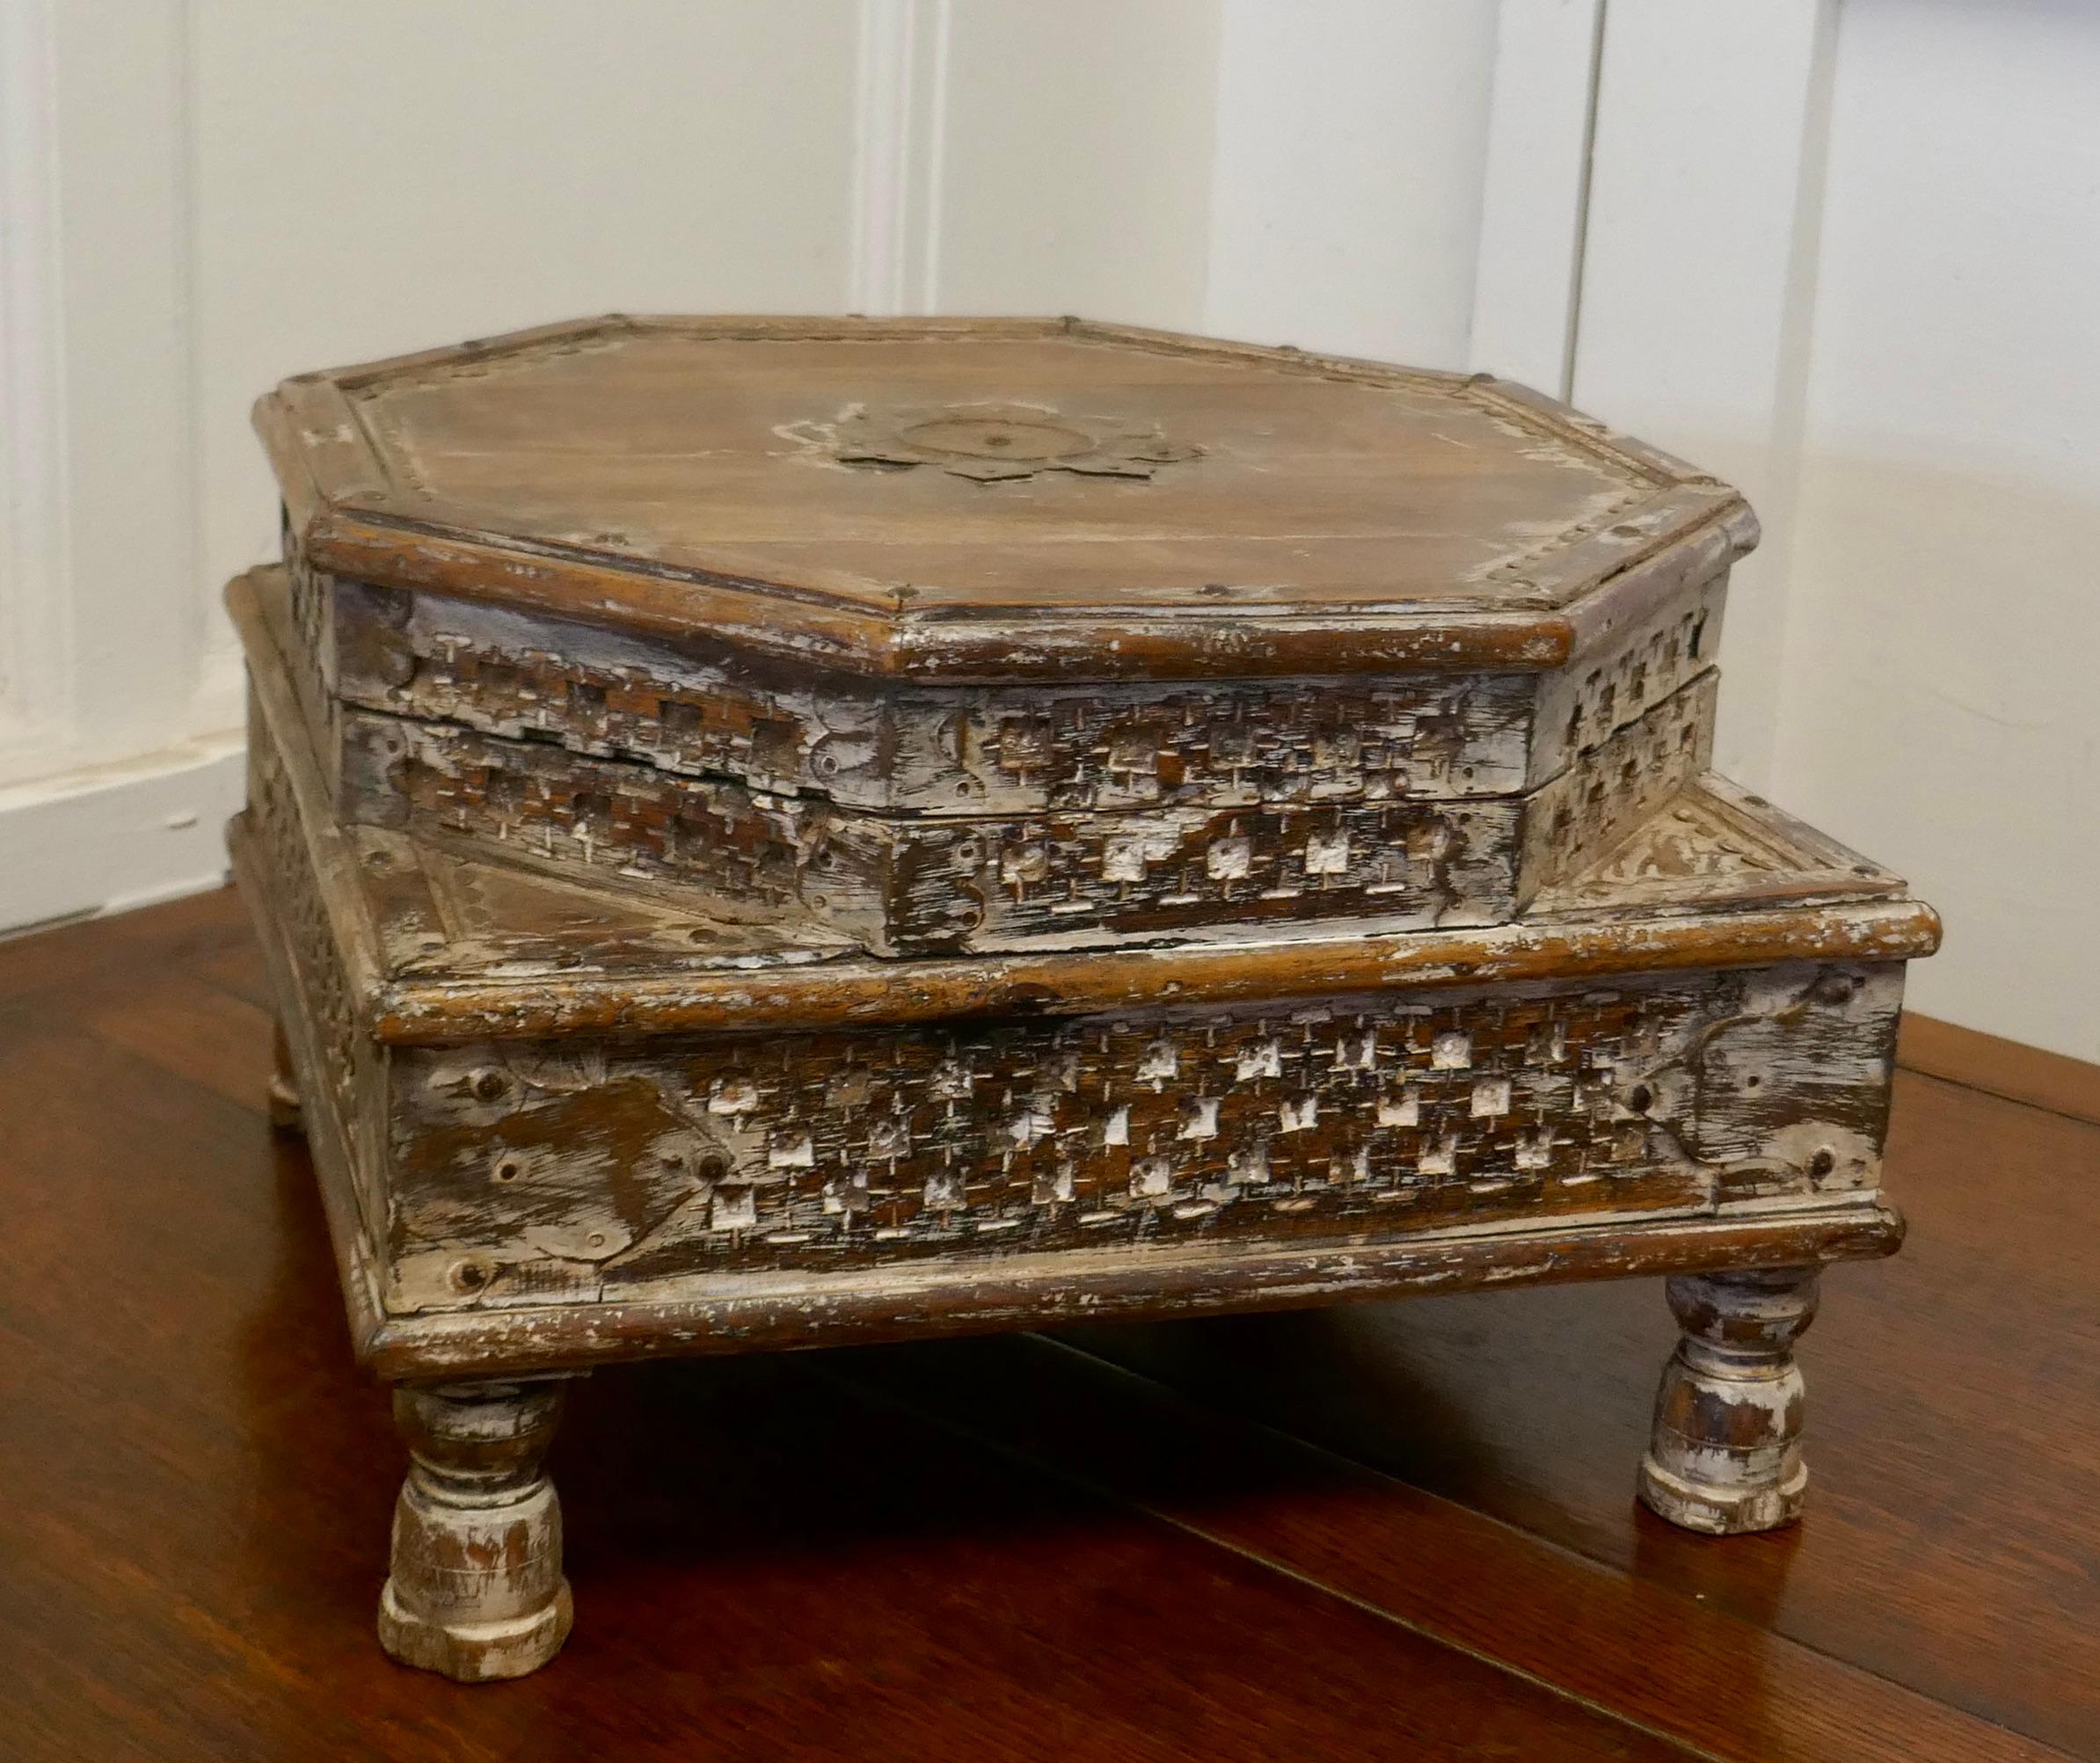 Double height carved Indian box

An unusual piece with 2 levels, the top of the box in the octagonal shape has an opening lid. The lower is rectangular and it stands on small feet
The box is carved and decorated with brass inlay and has